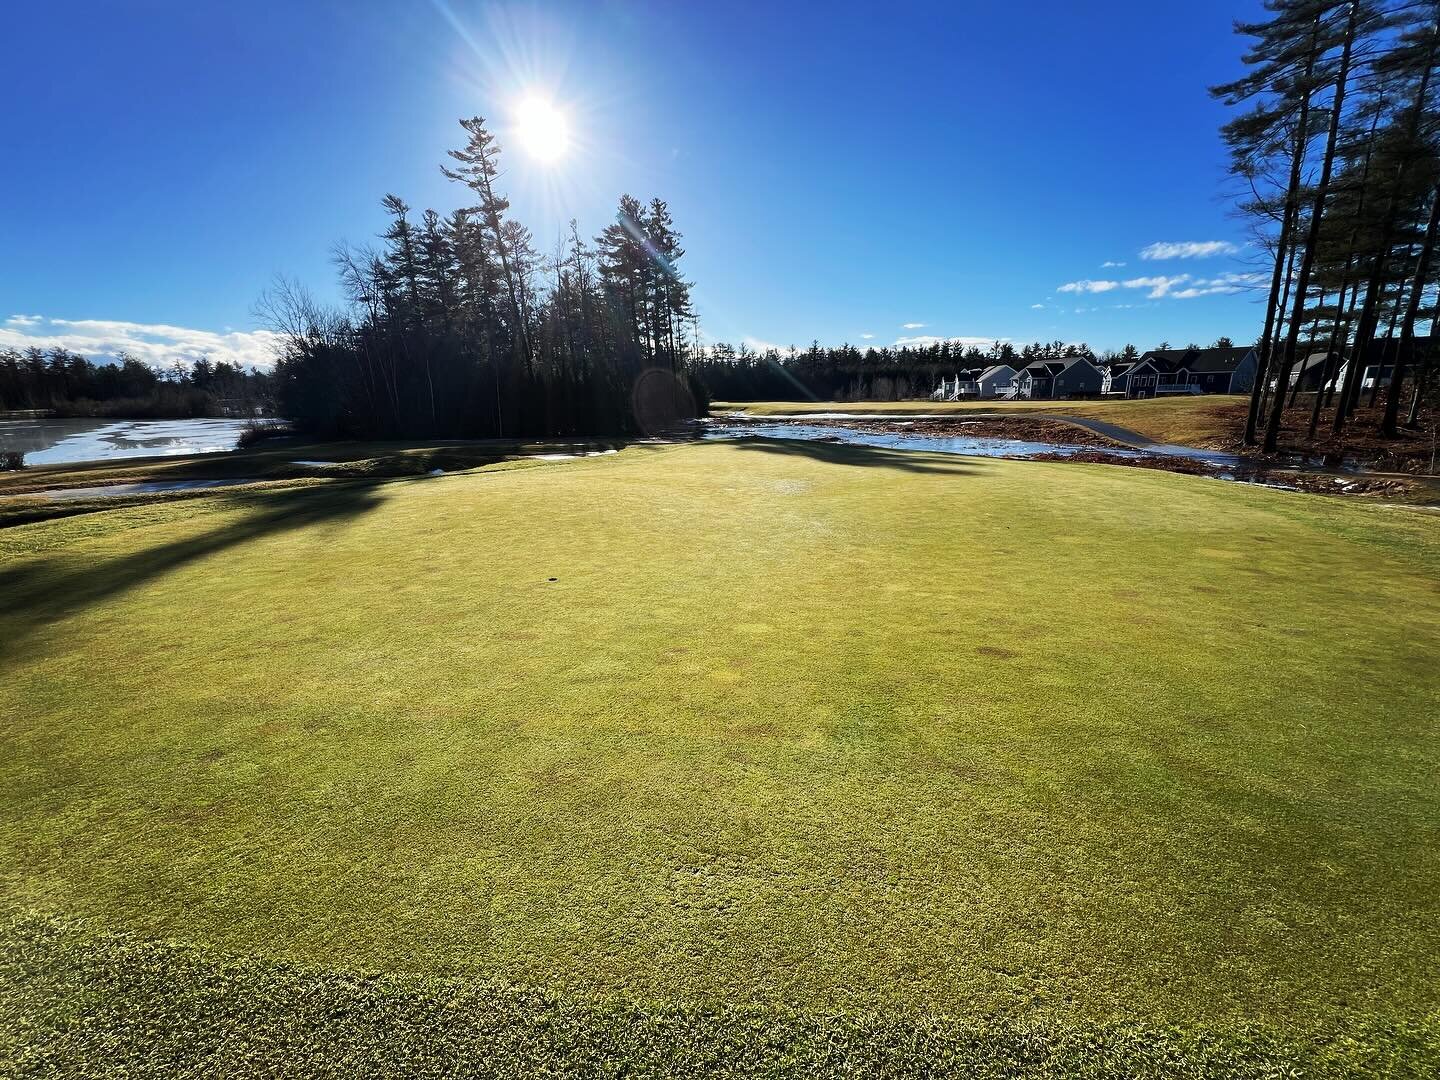 Is it January or June? This weather is something else! Let&rsquo;s keep this oddly mild winter going for an early spring! The @trackmangolf &amp; @fullswingsimulators are open and rocking! Come on by and stay loose! #mainegolf #sunnywellsmaine #simsf